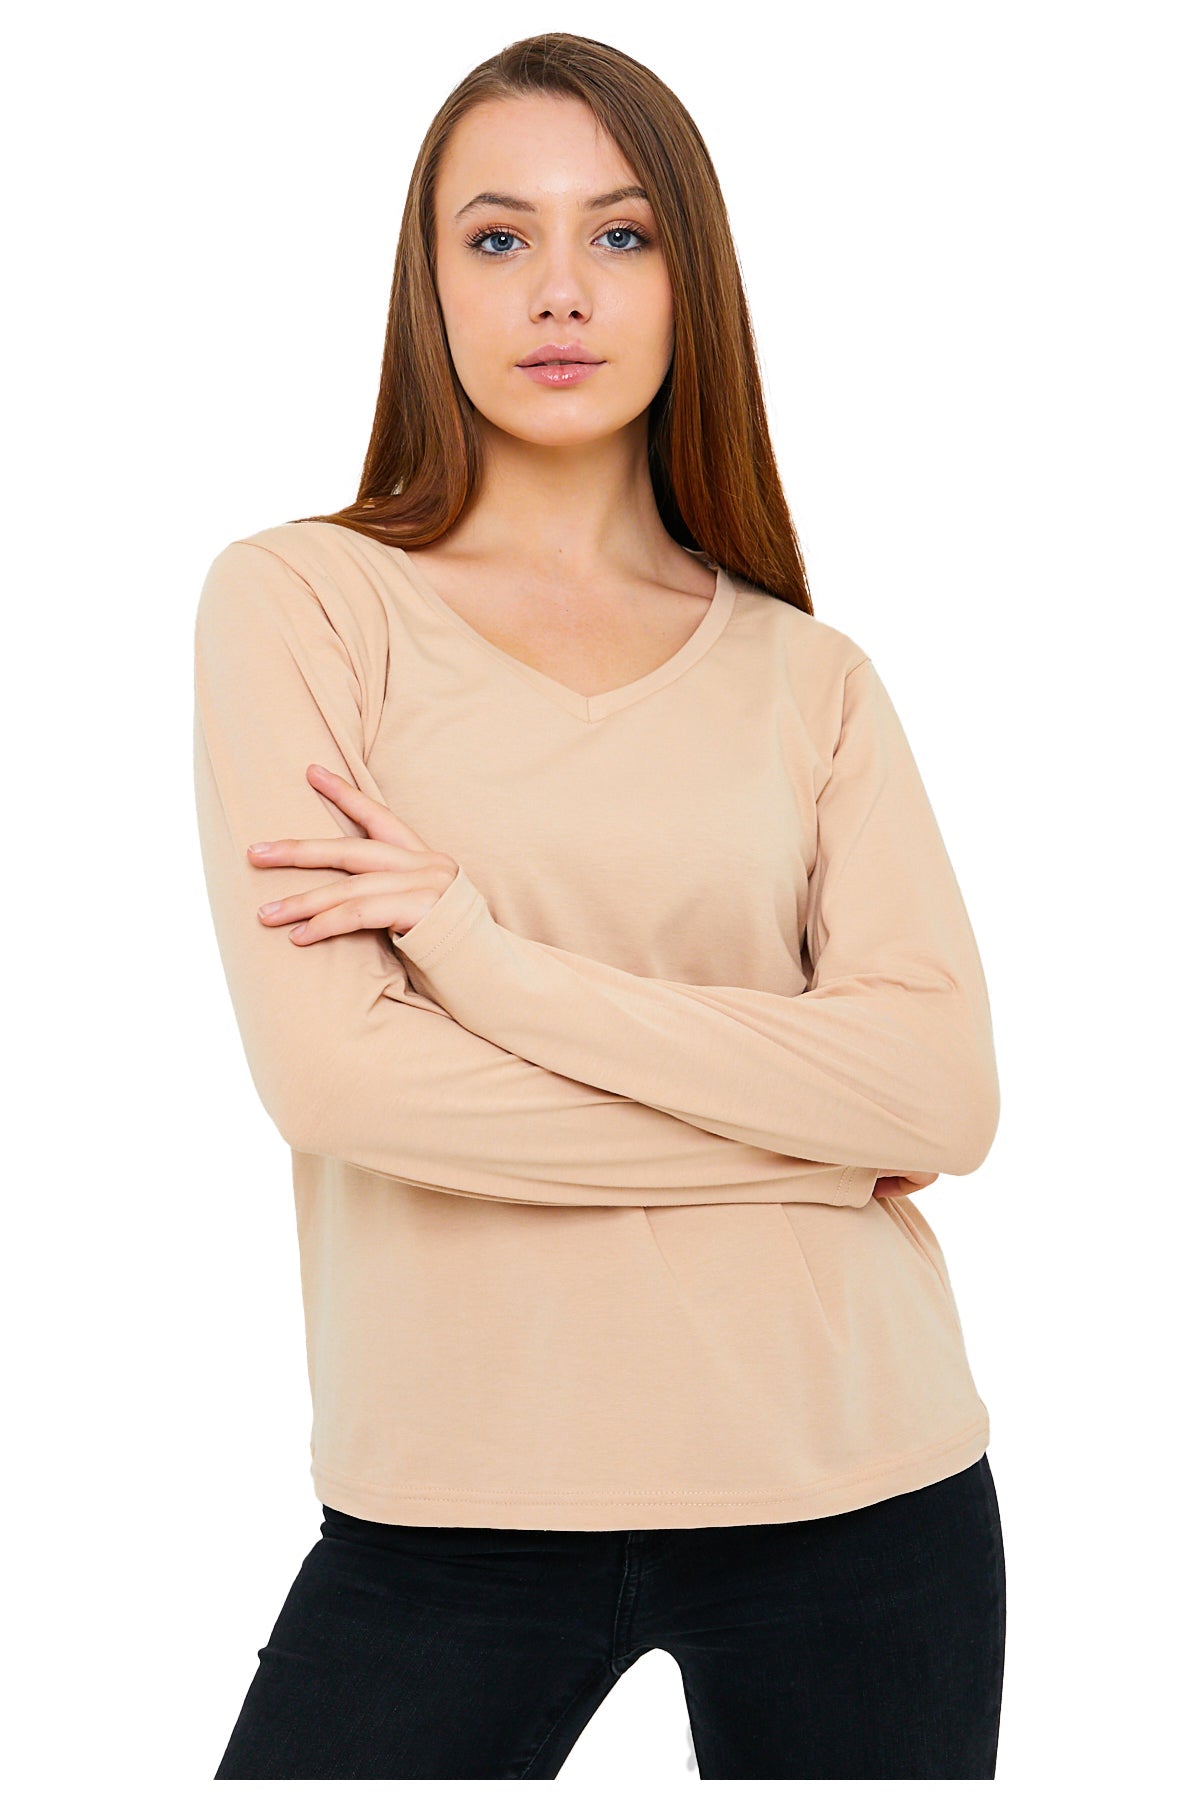 Long Sleeve V Neck T-Shirts for Women & Girls - Colorful Pima Cotton-128